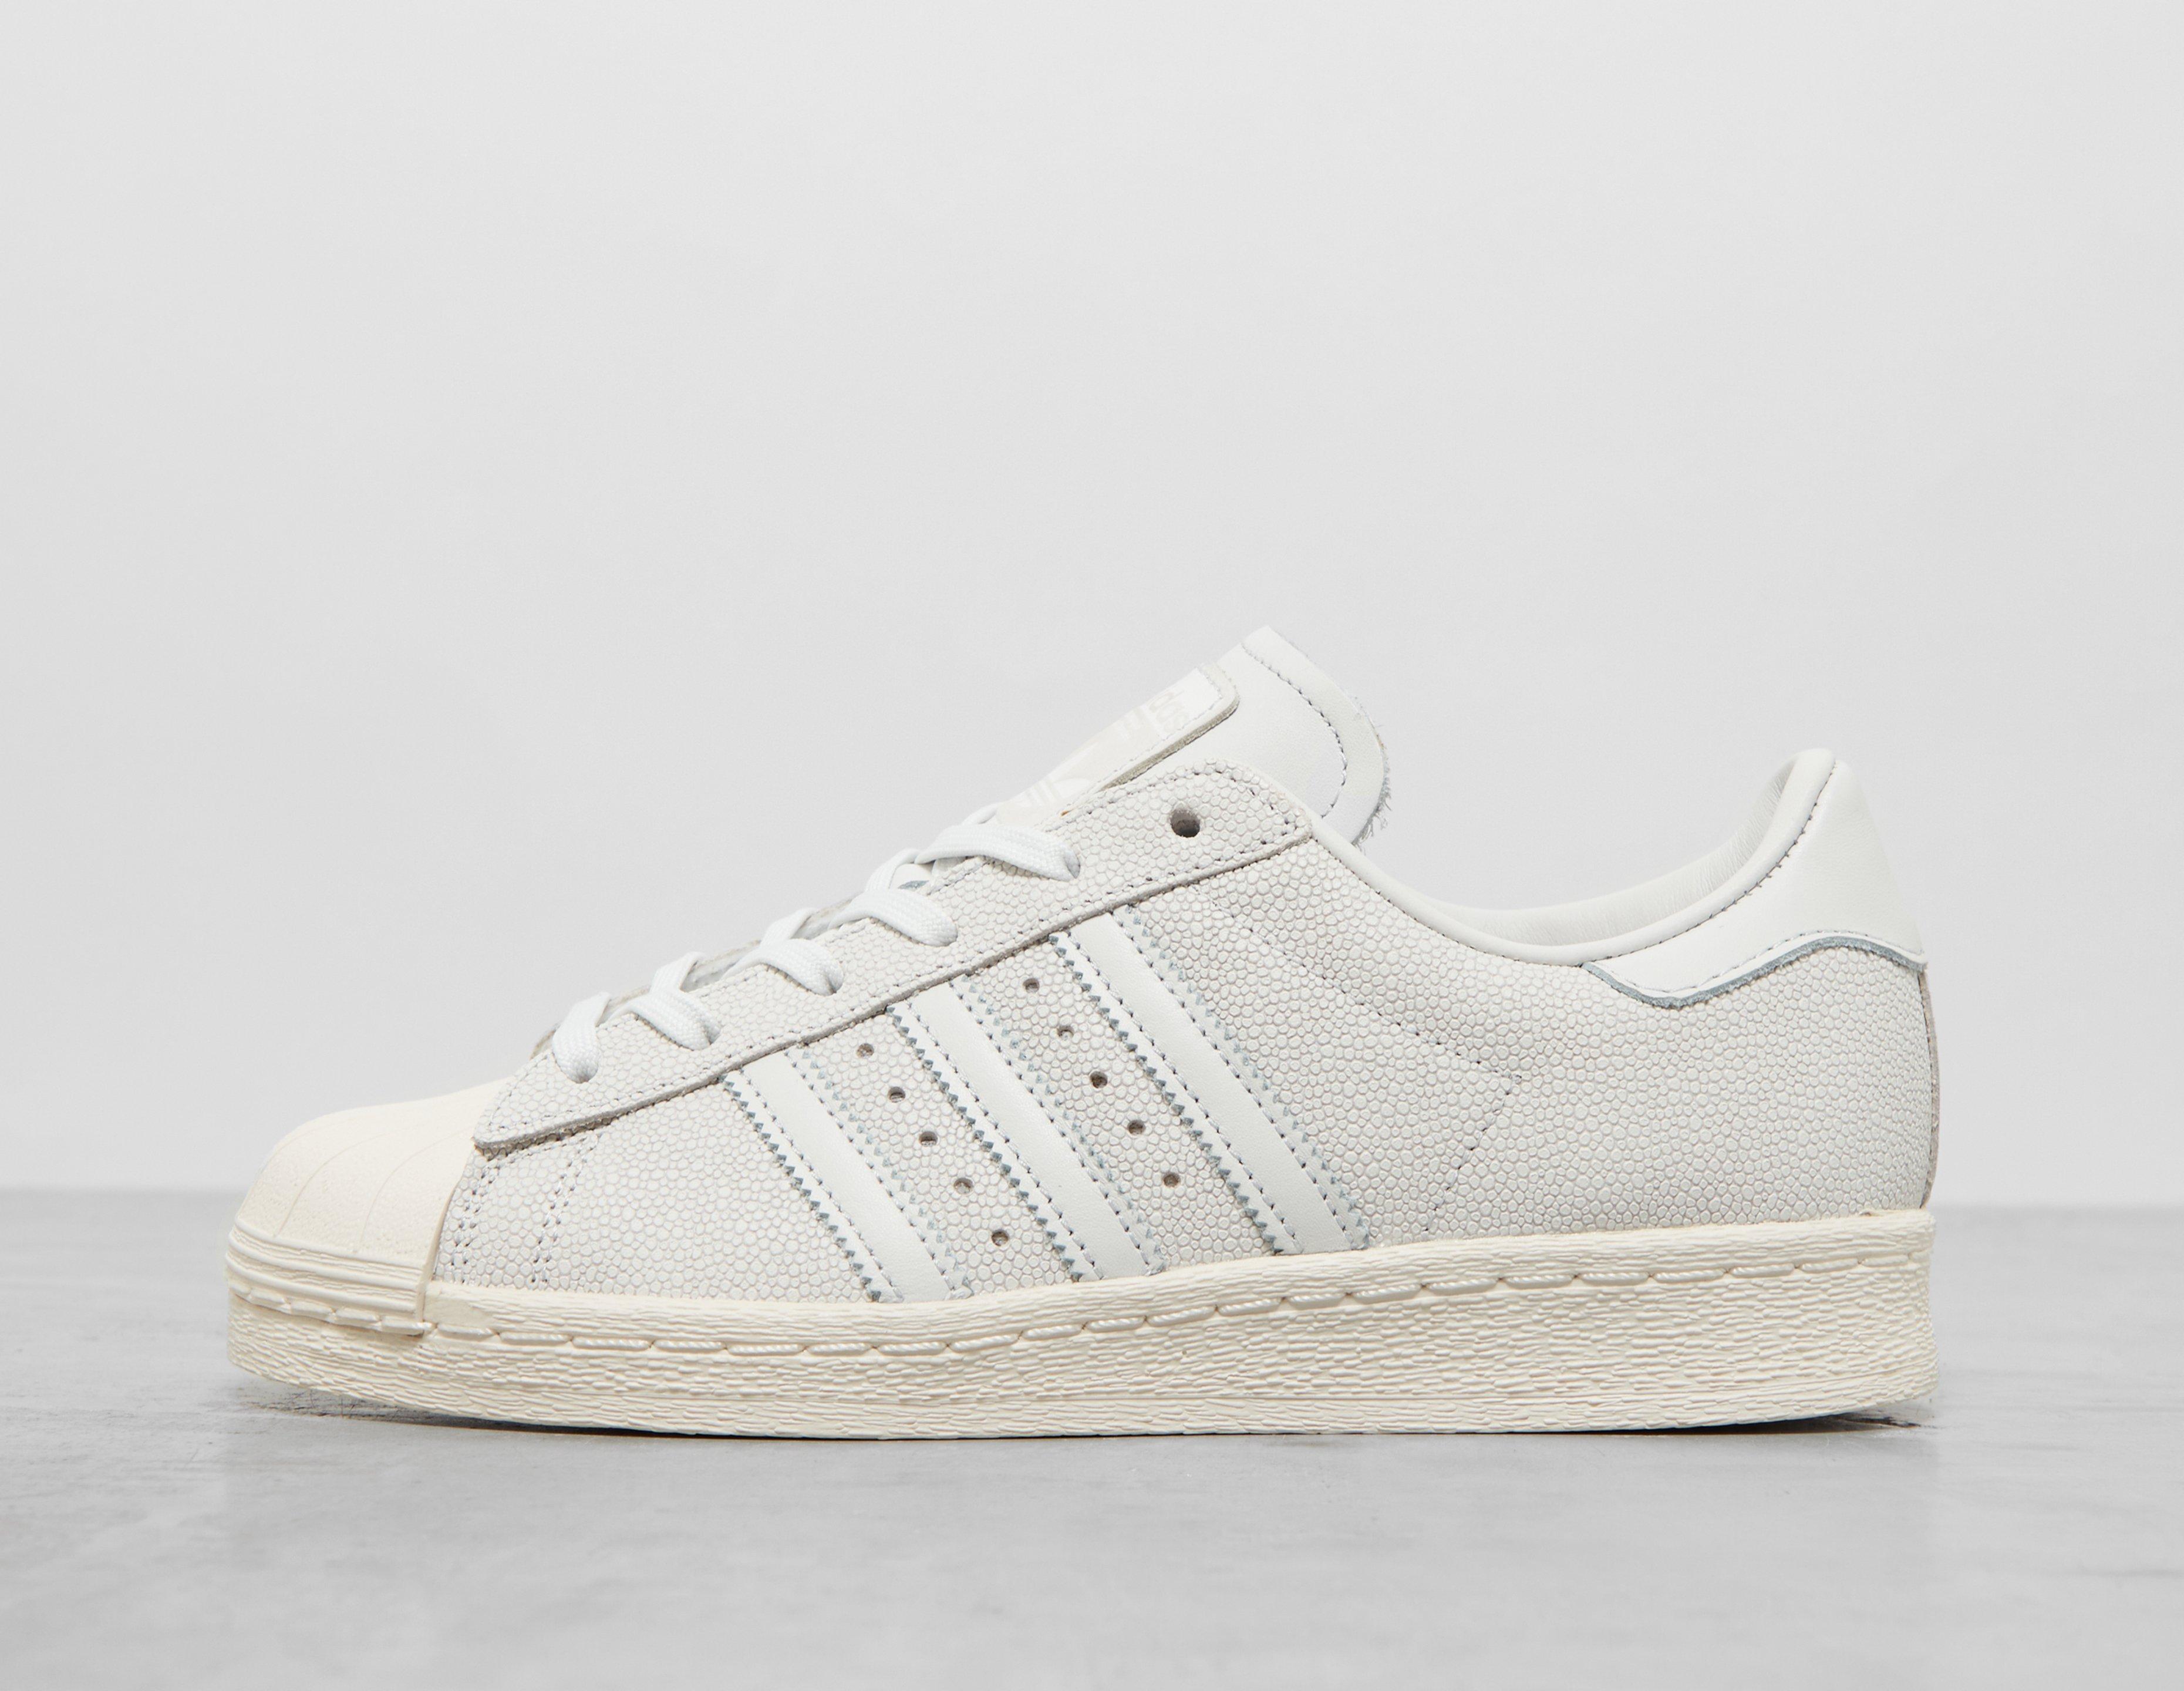 adidas originals x champs HealthdesignShops piping pack Superstar commercial adicolor Originals 82 Women\'s with White | adidas 